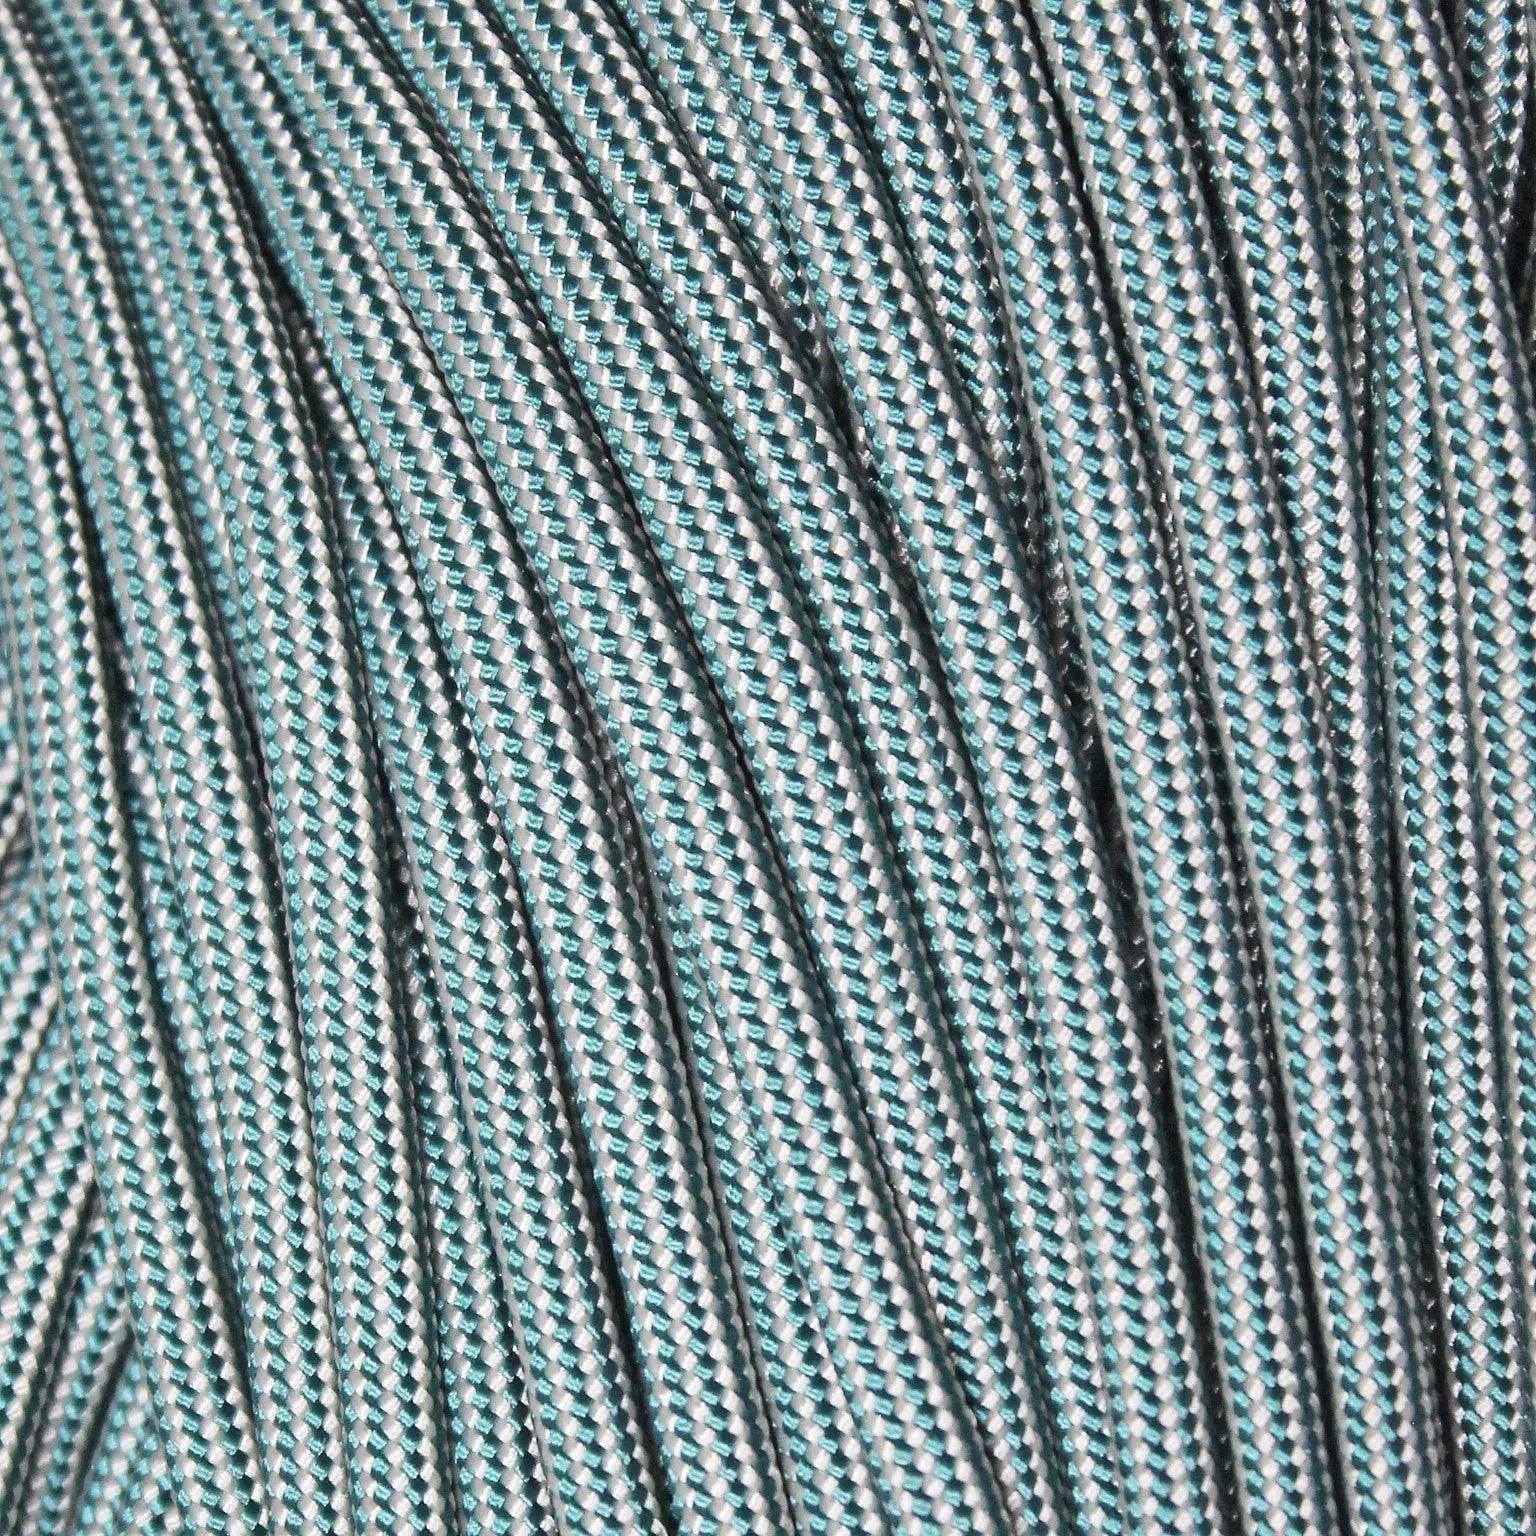 550 Paracord Cream and Teal Stripes Made in the USA Nylon/Nylon (100 FT.) - Paracord Galaxy